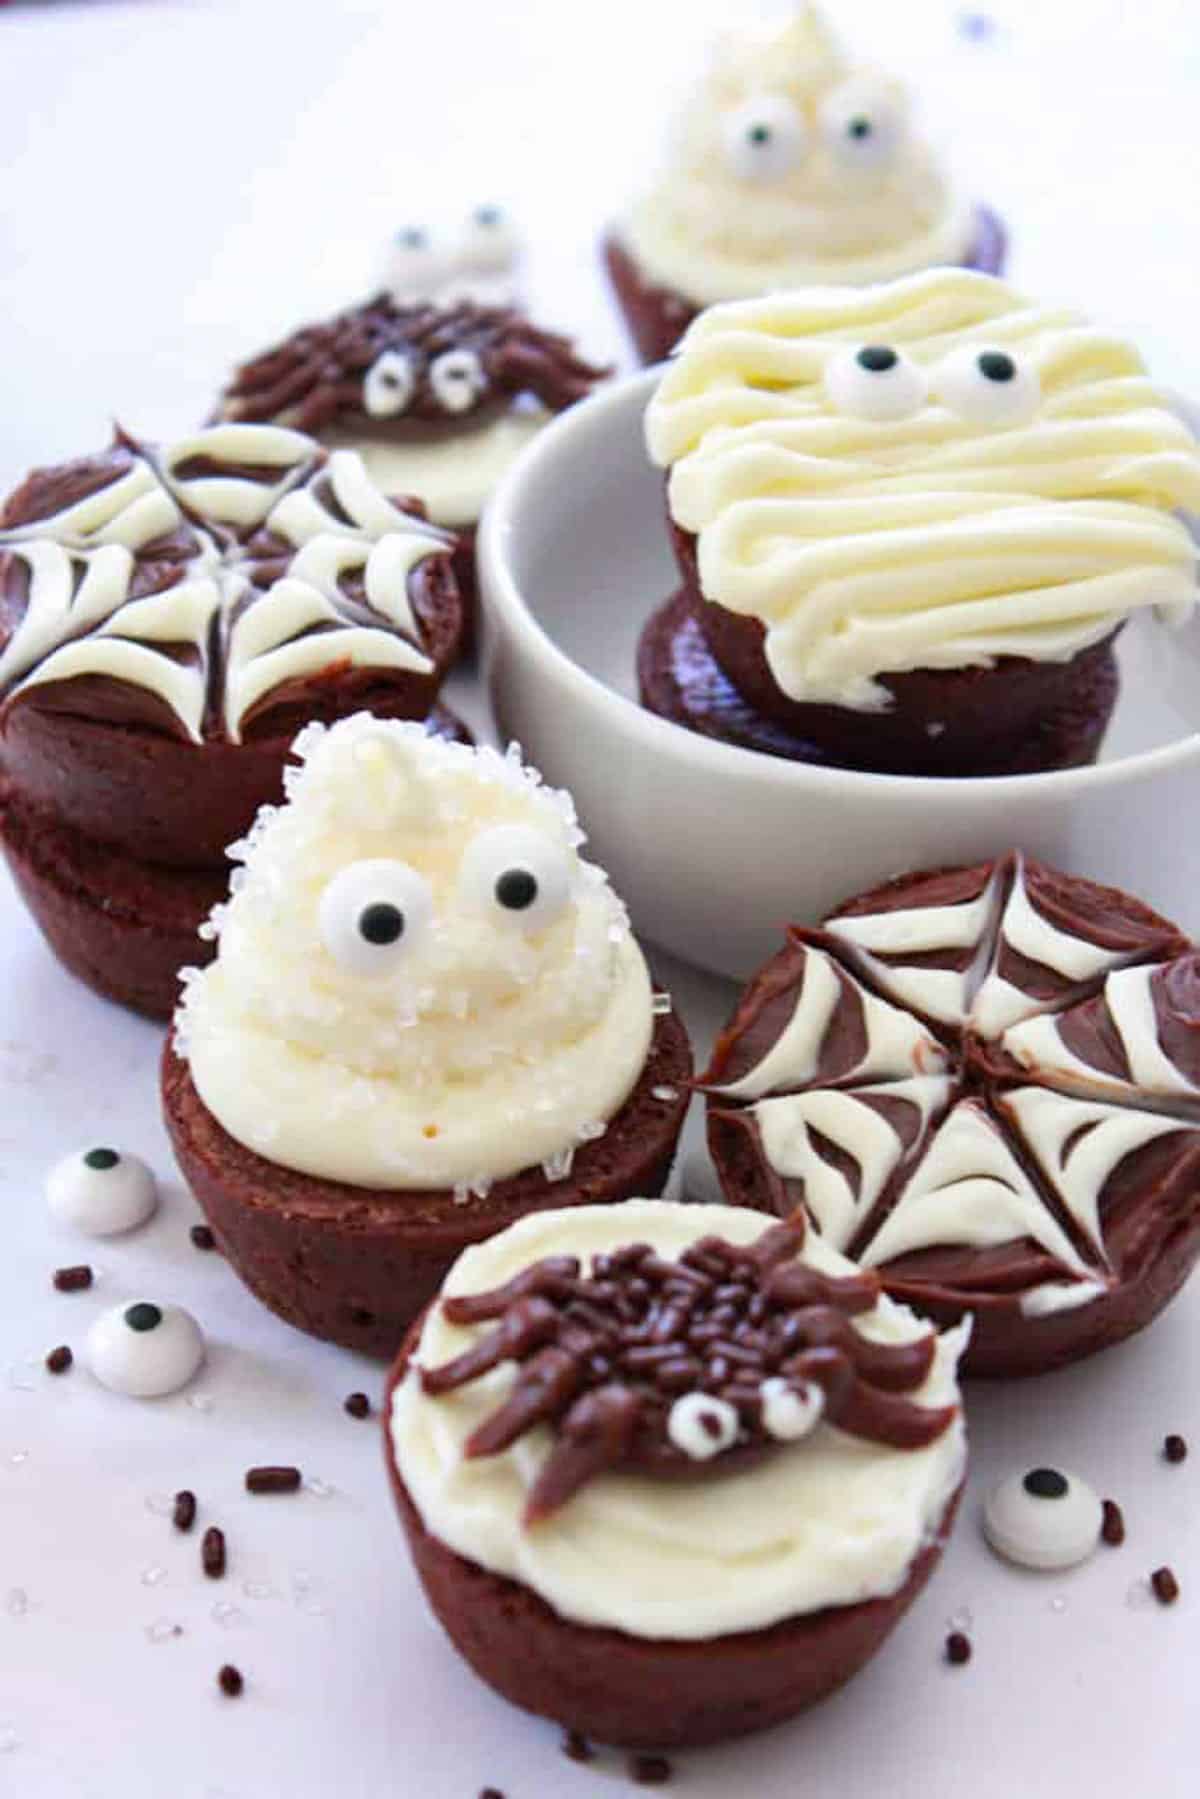 round brownies decorated as ghosts, spiders, and spider webs